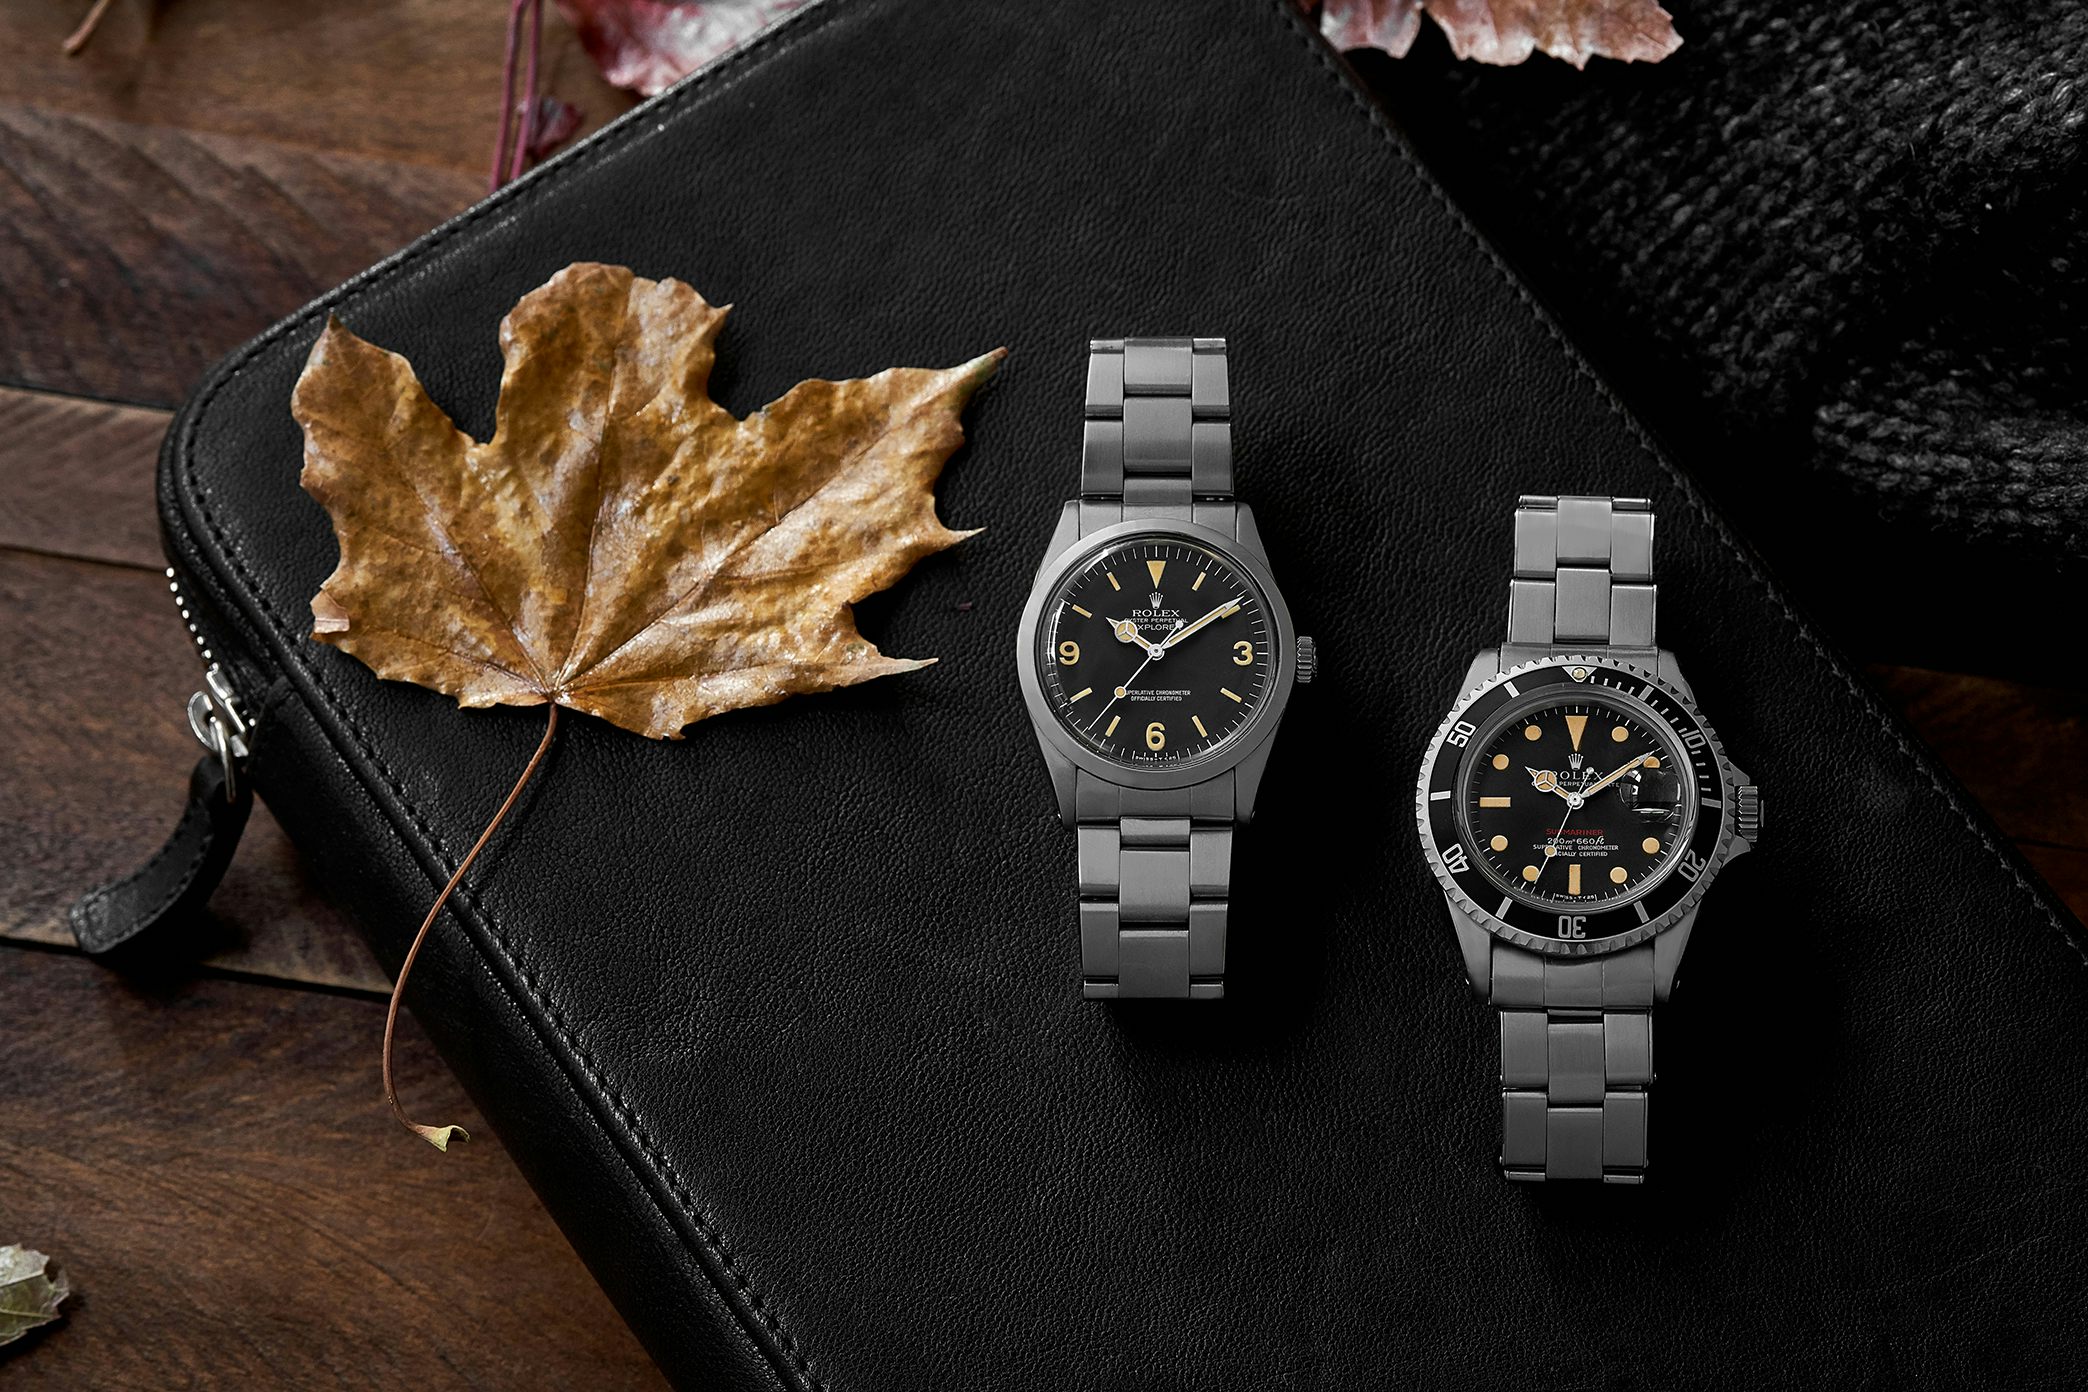 Vintage Watches: A 1967 Seiko '62MAS,' A 1972 Benrus Type I, And A 1969  Rolex 'Red' Submariner - Hodinkee